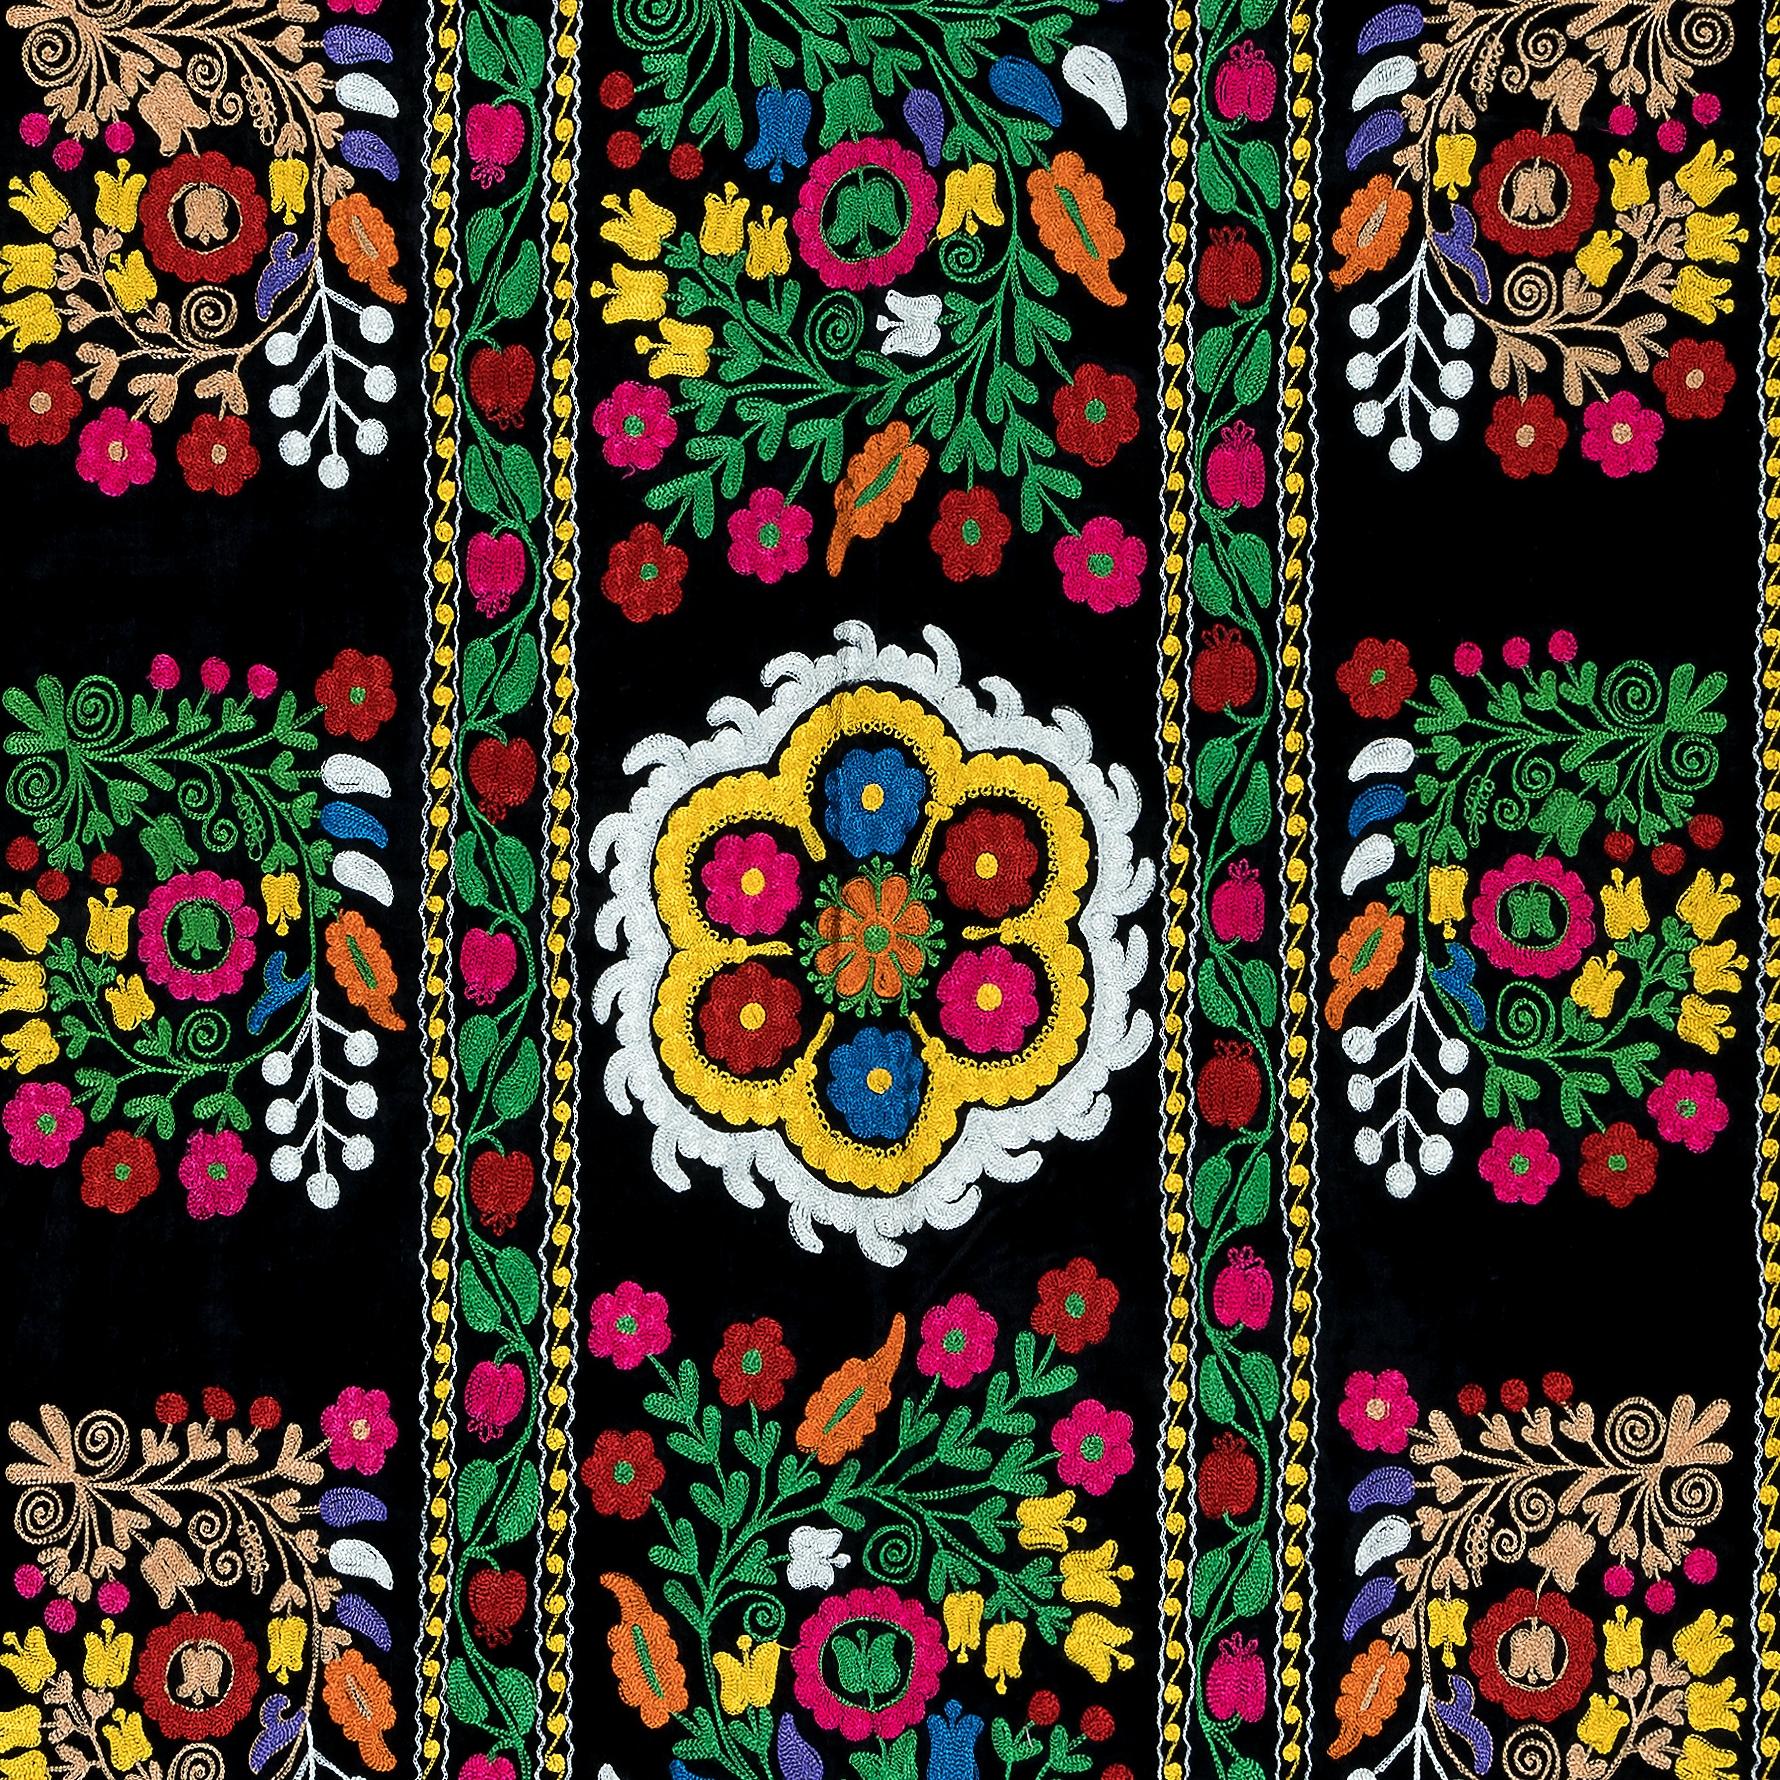 Uzbek 4x7.4 Ft Silk Embroidery Table Cover, Colorful Wall Hanging, Vintage Bedspread For Sale